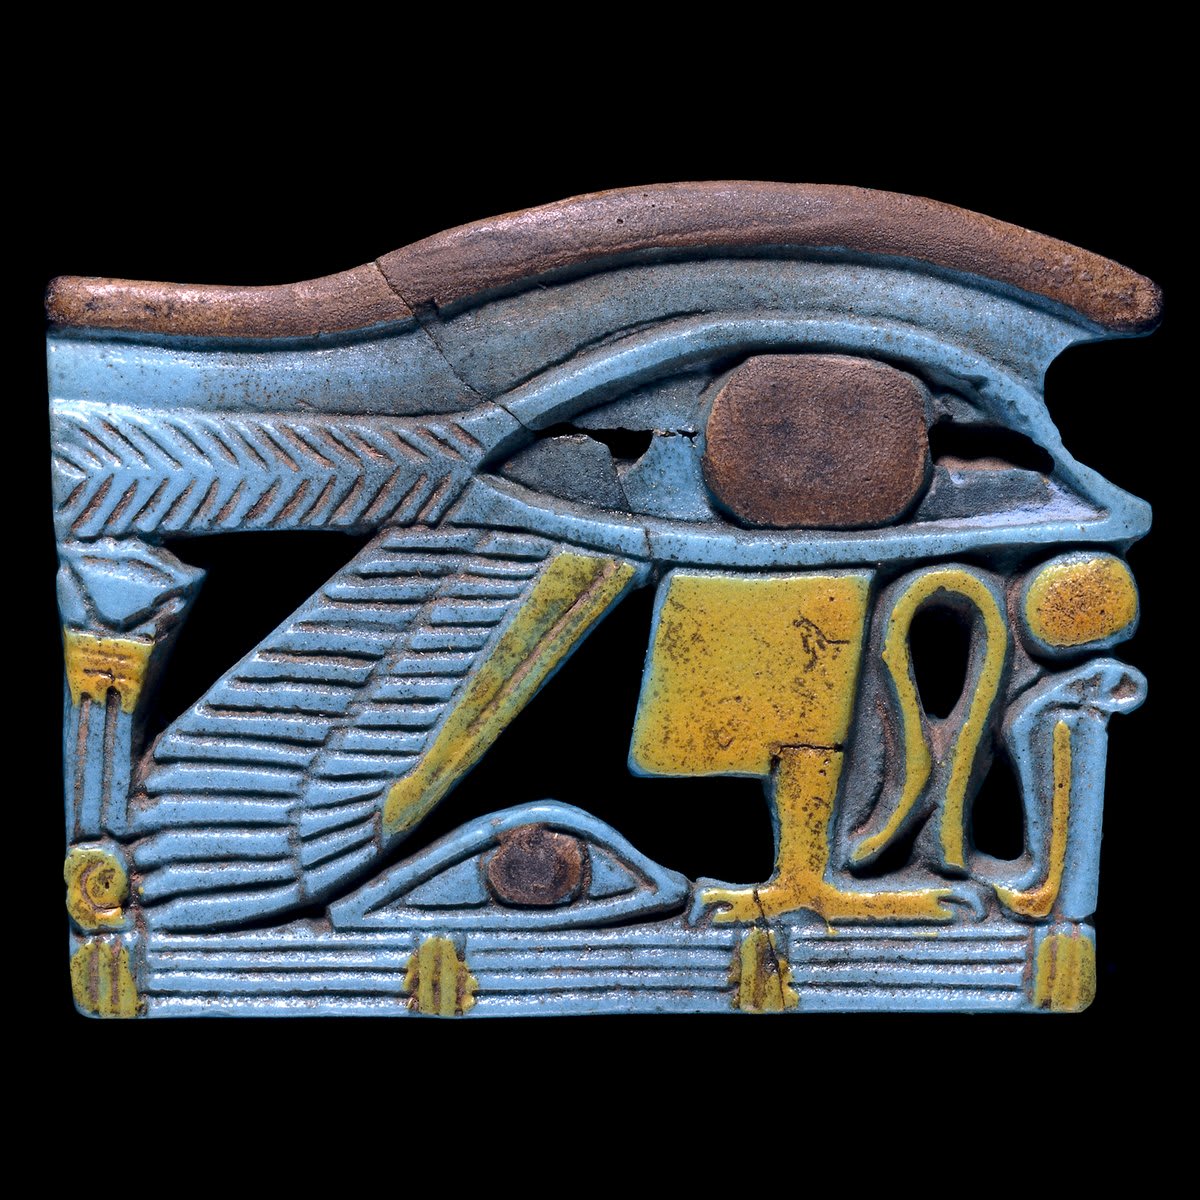 The Eye of Horus was an ancient Egyptian symbol worn for protection, imbued with regenerative and magical properties 👁 Horus was the god of the sky and kingship, and was often depicted as a falcon 🦅